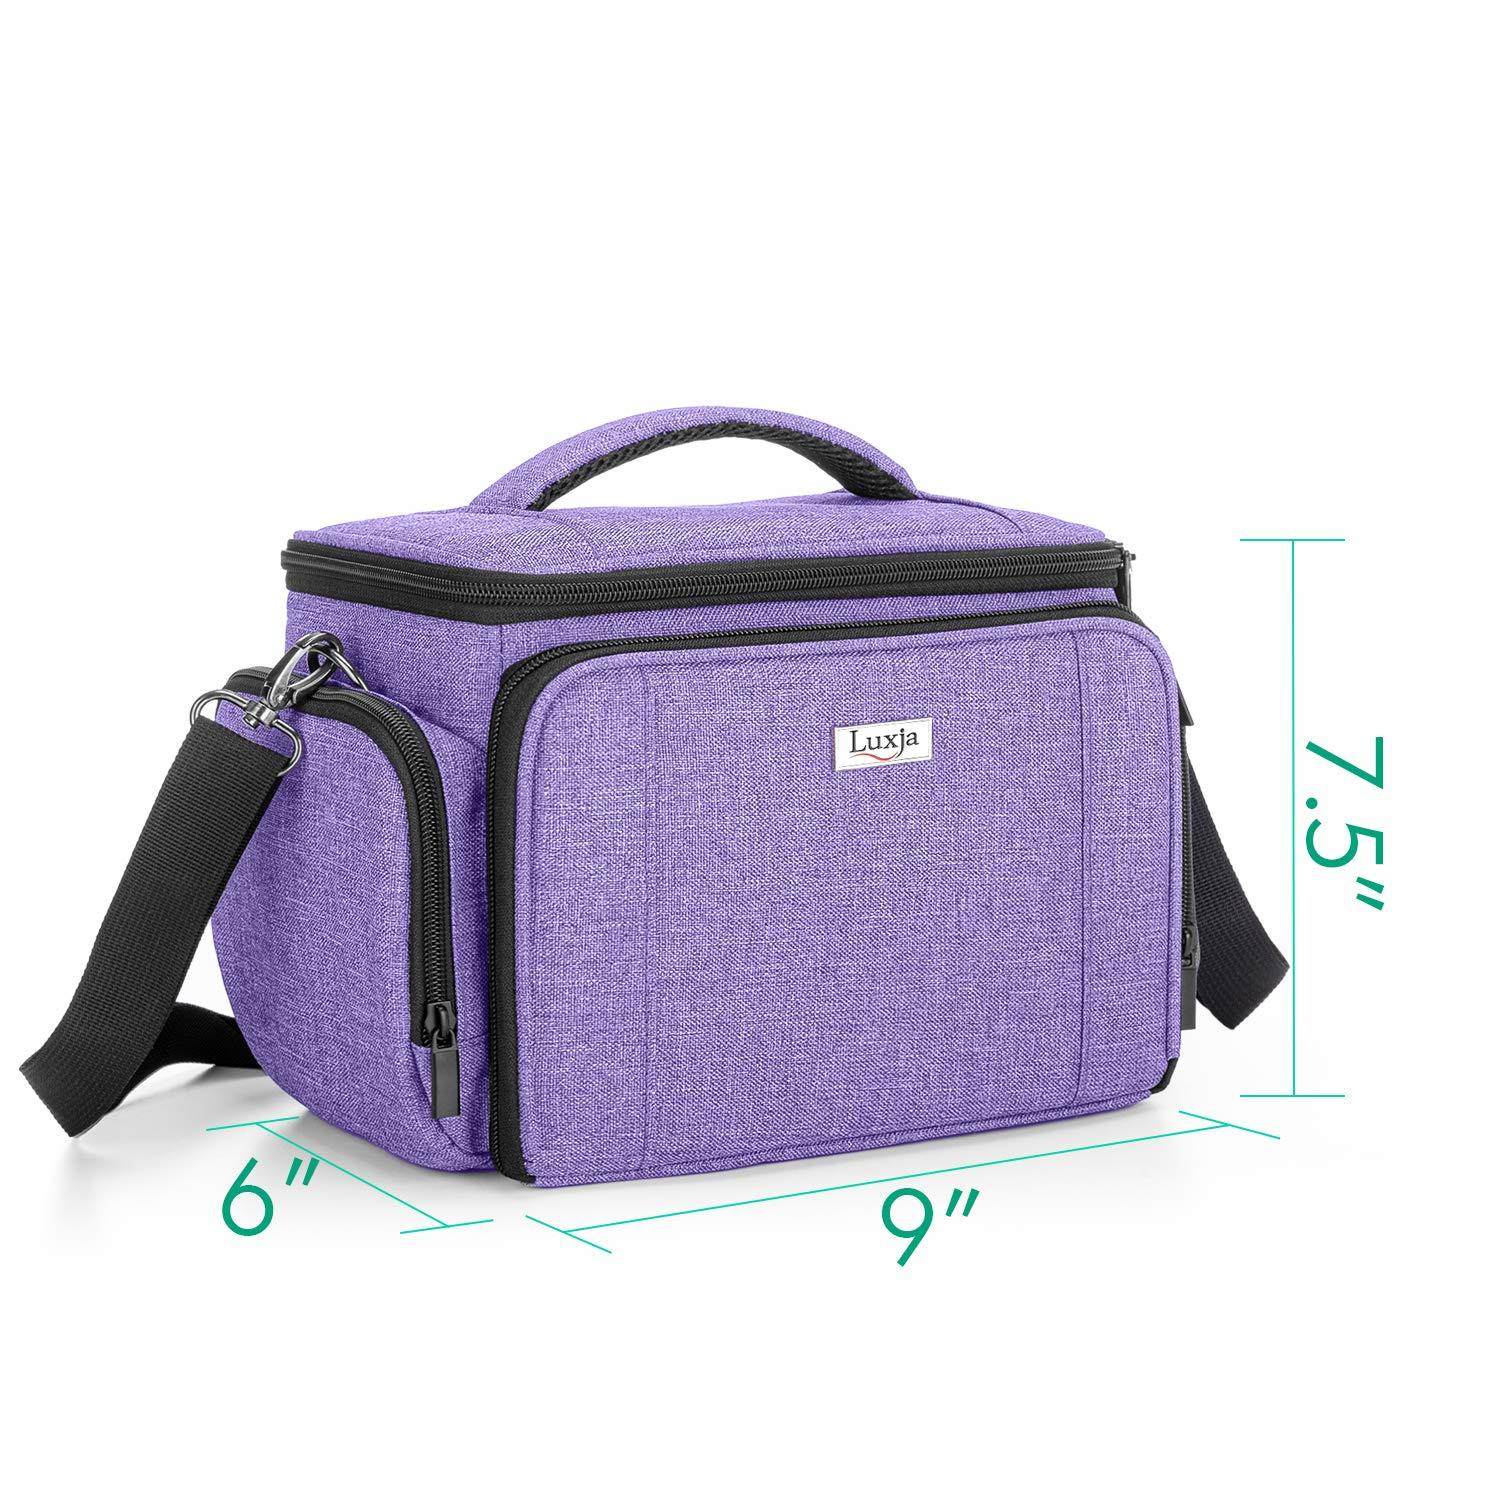 Luxja Carrying Case Compatible with Cricut Mug Press and Cricut